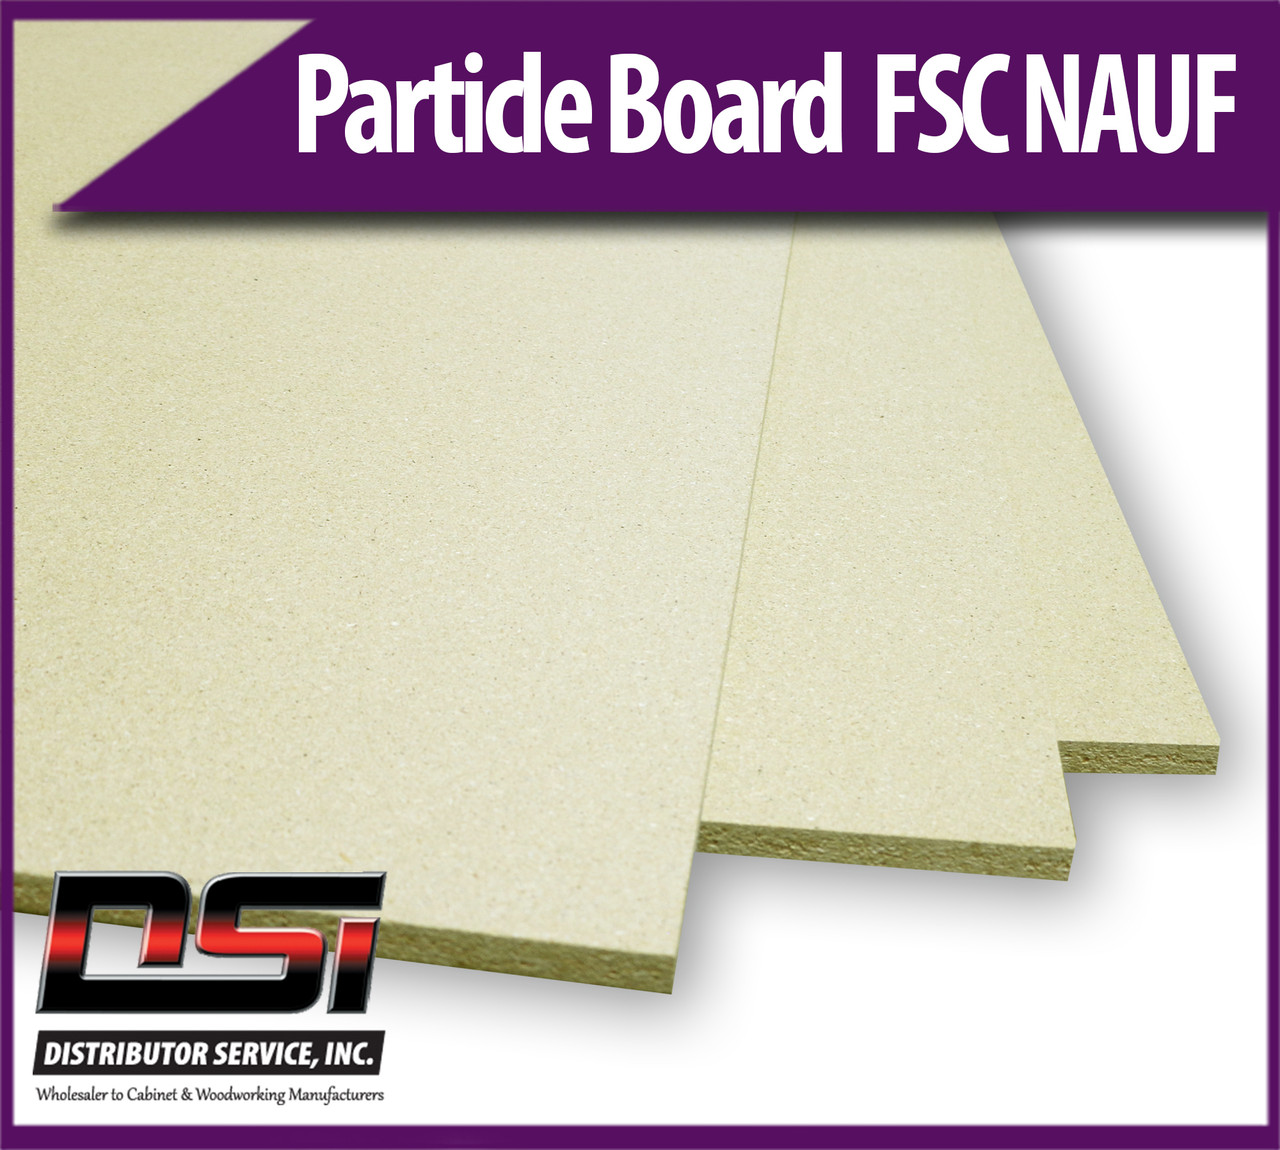 Particle Board Core FSC NAUF 11/16" x 49" x 121" Industrial Particleboard Panels